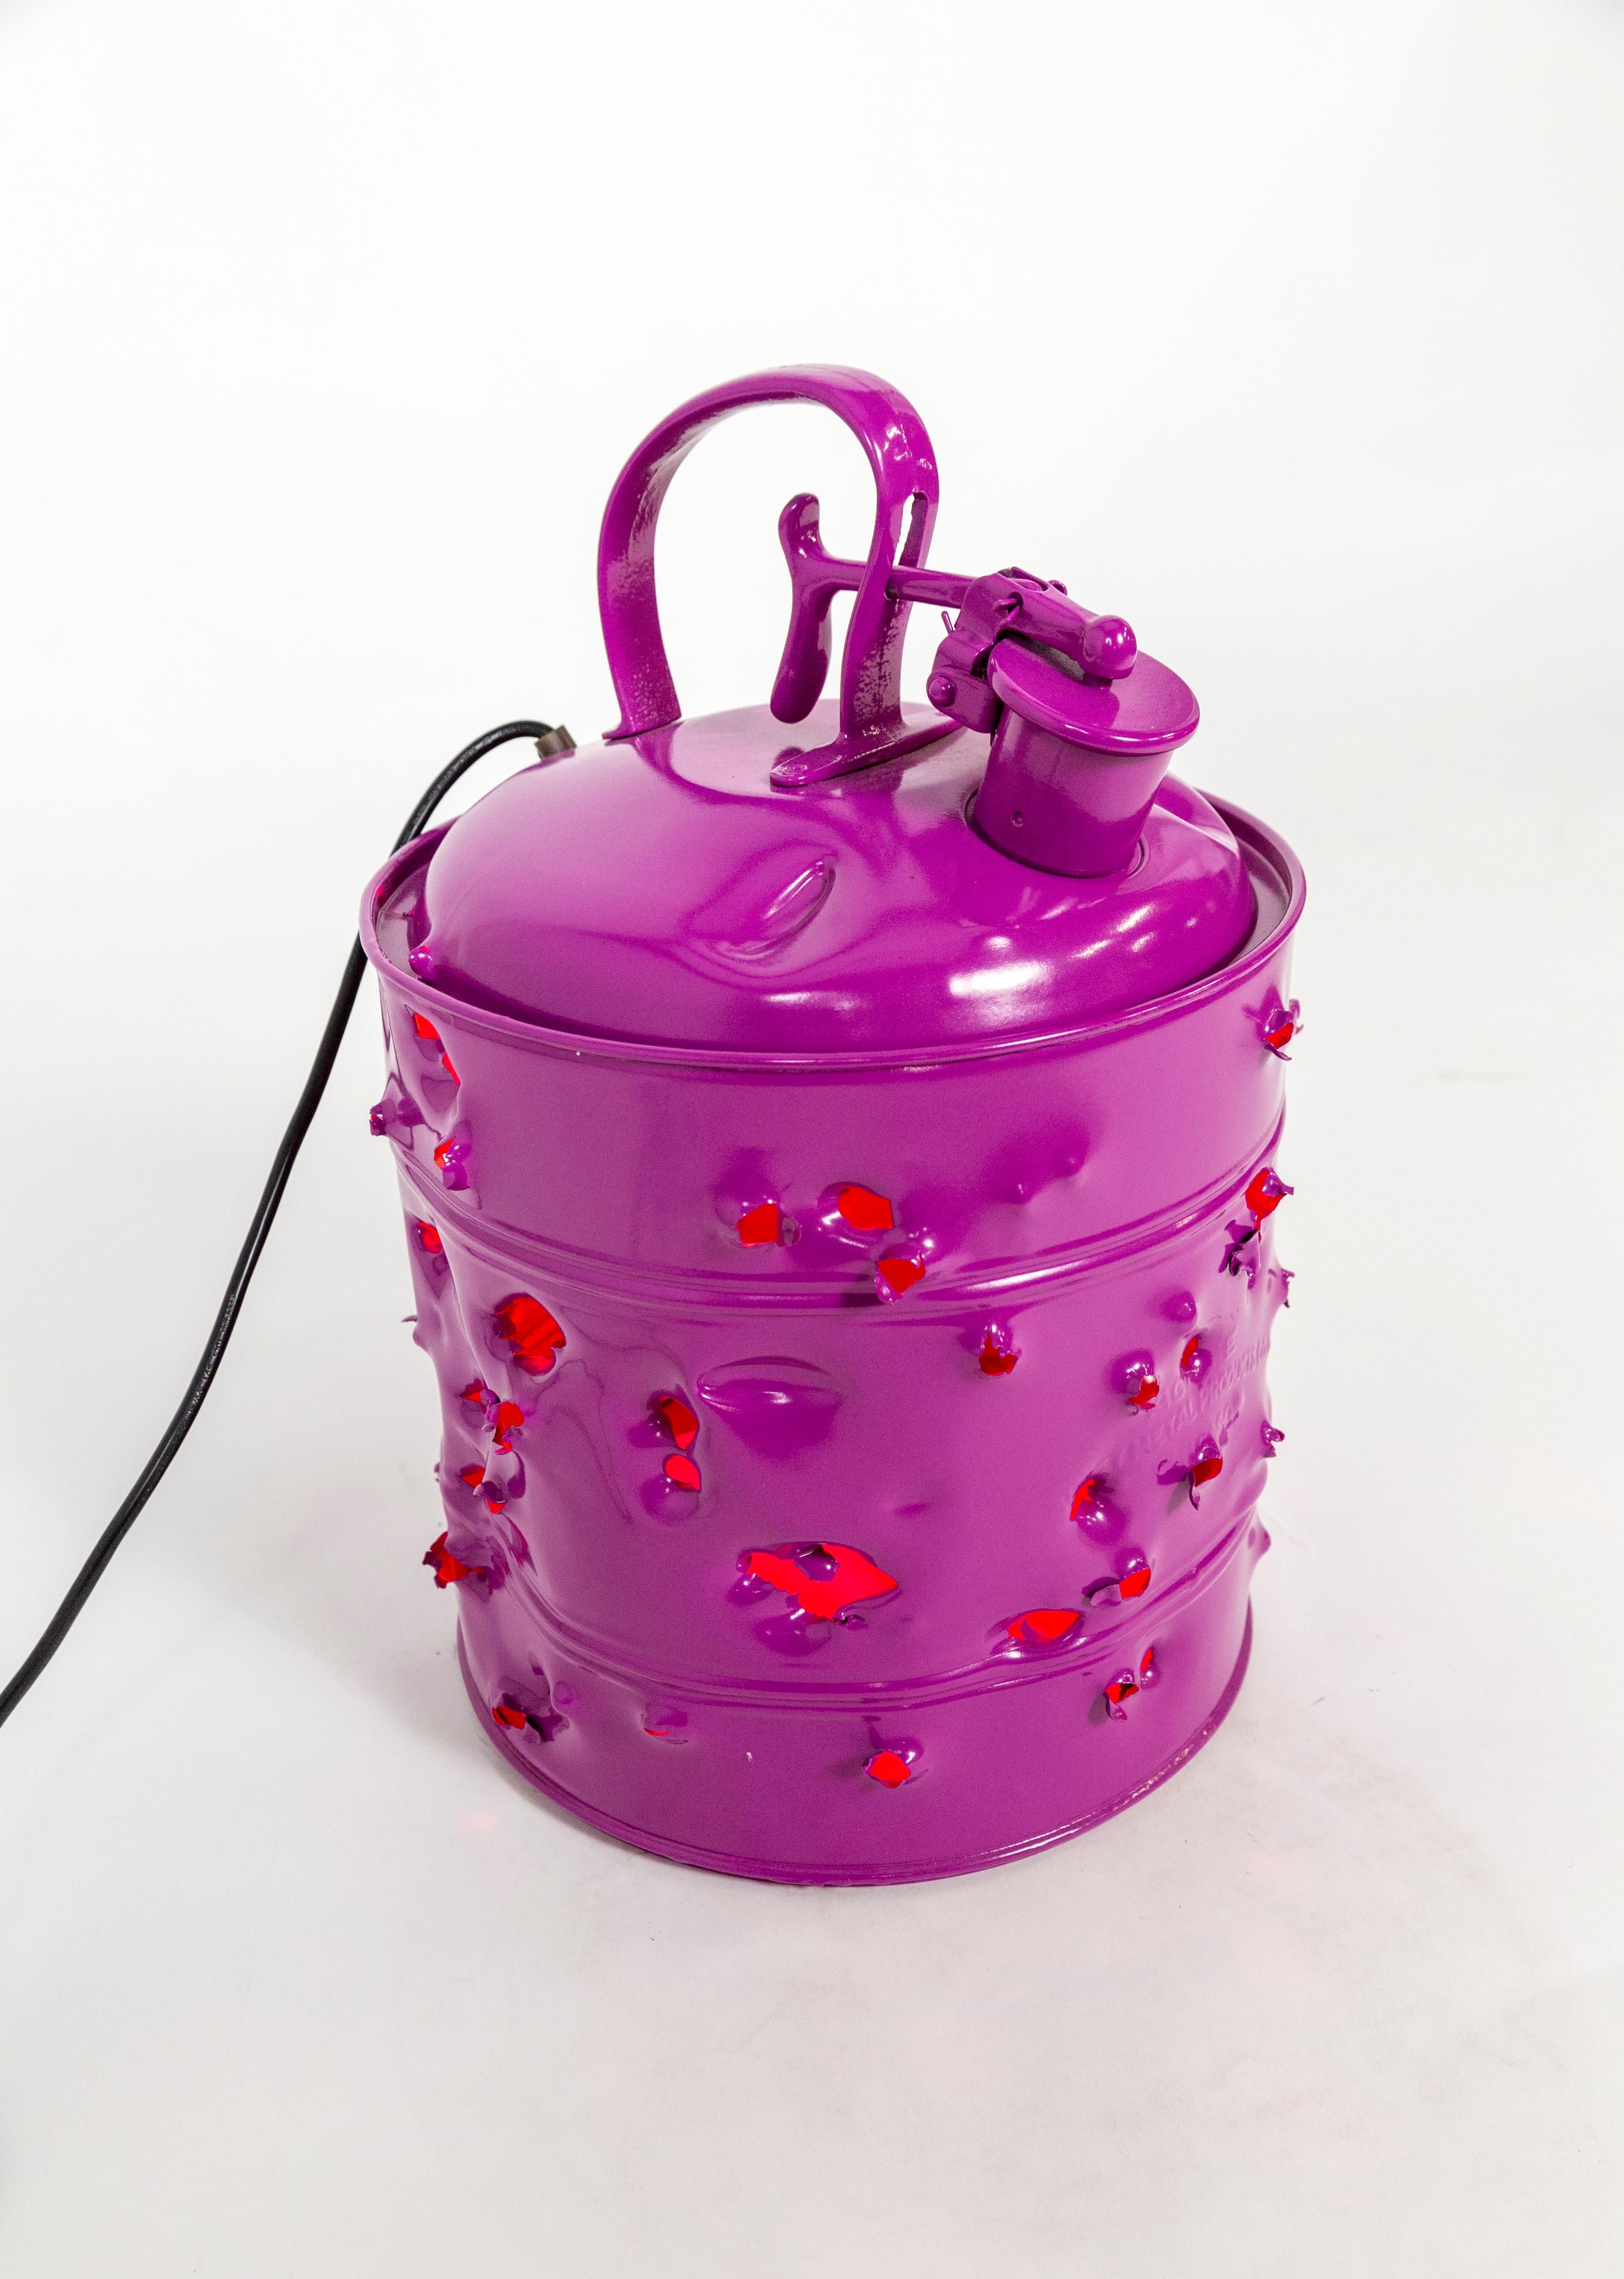 This powder coated, metal gas can is a bold art object by Charles Linder, who has been making artwork out of bullet-riddled objects for over 30 years. It can be used as a pendant light or as a lamp. Seen here lit with a red light bulb. We also have